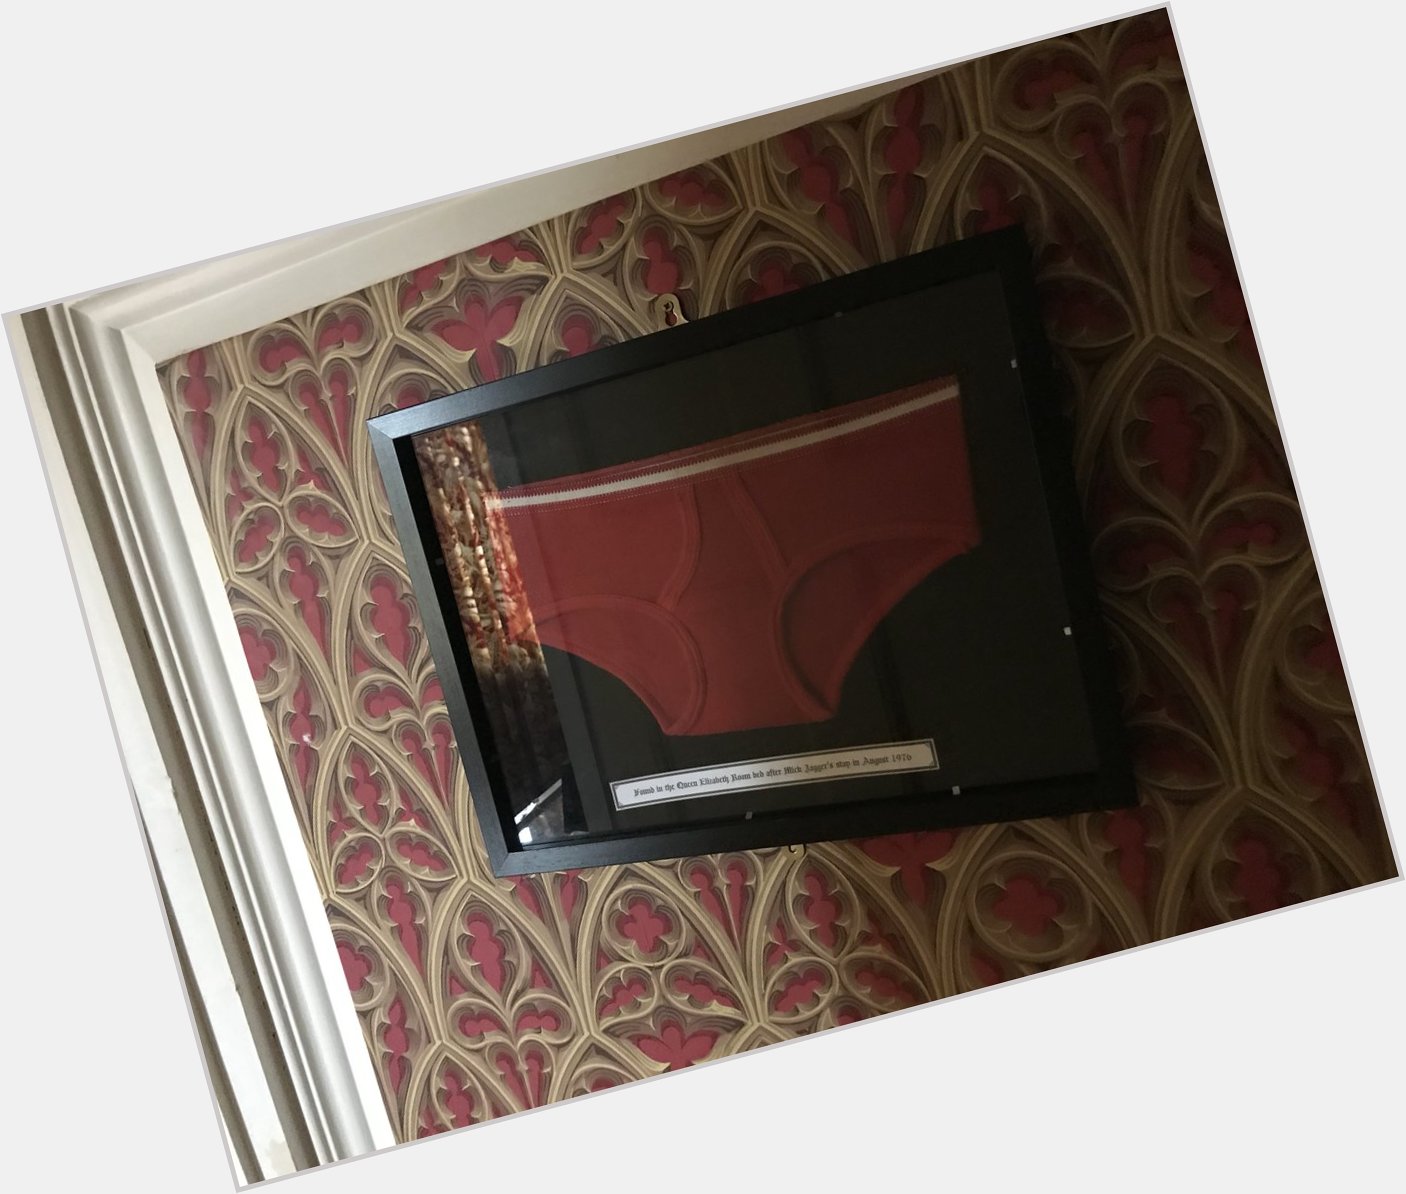 Happy 75th Birthday Mick Jagger. Decades ago he left his briefs in this bed at 